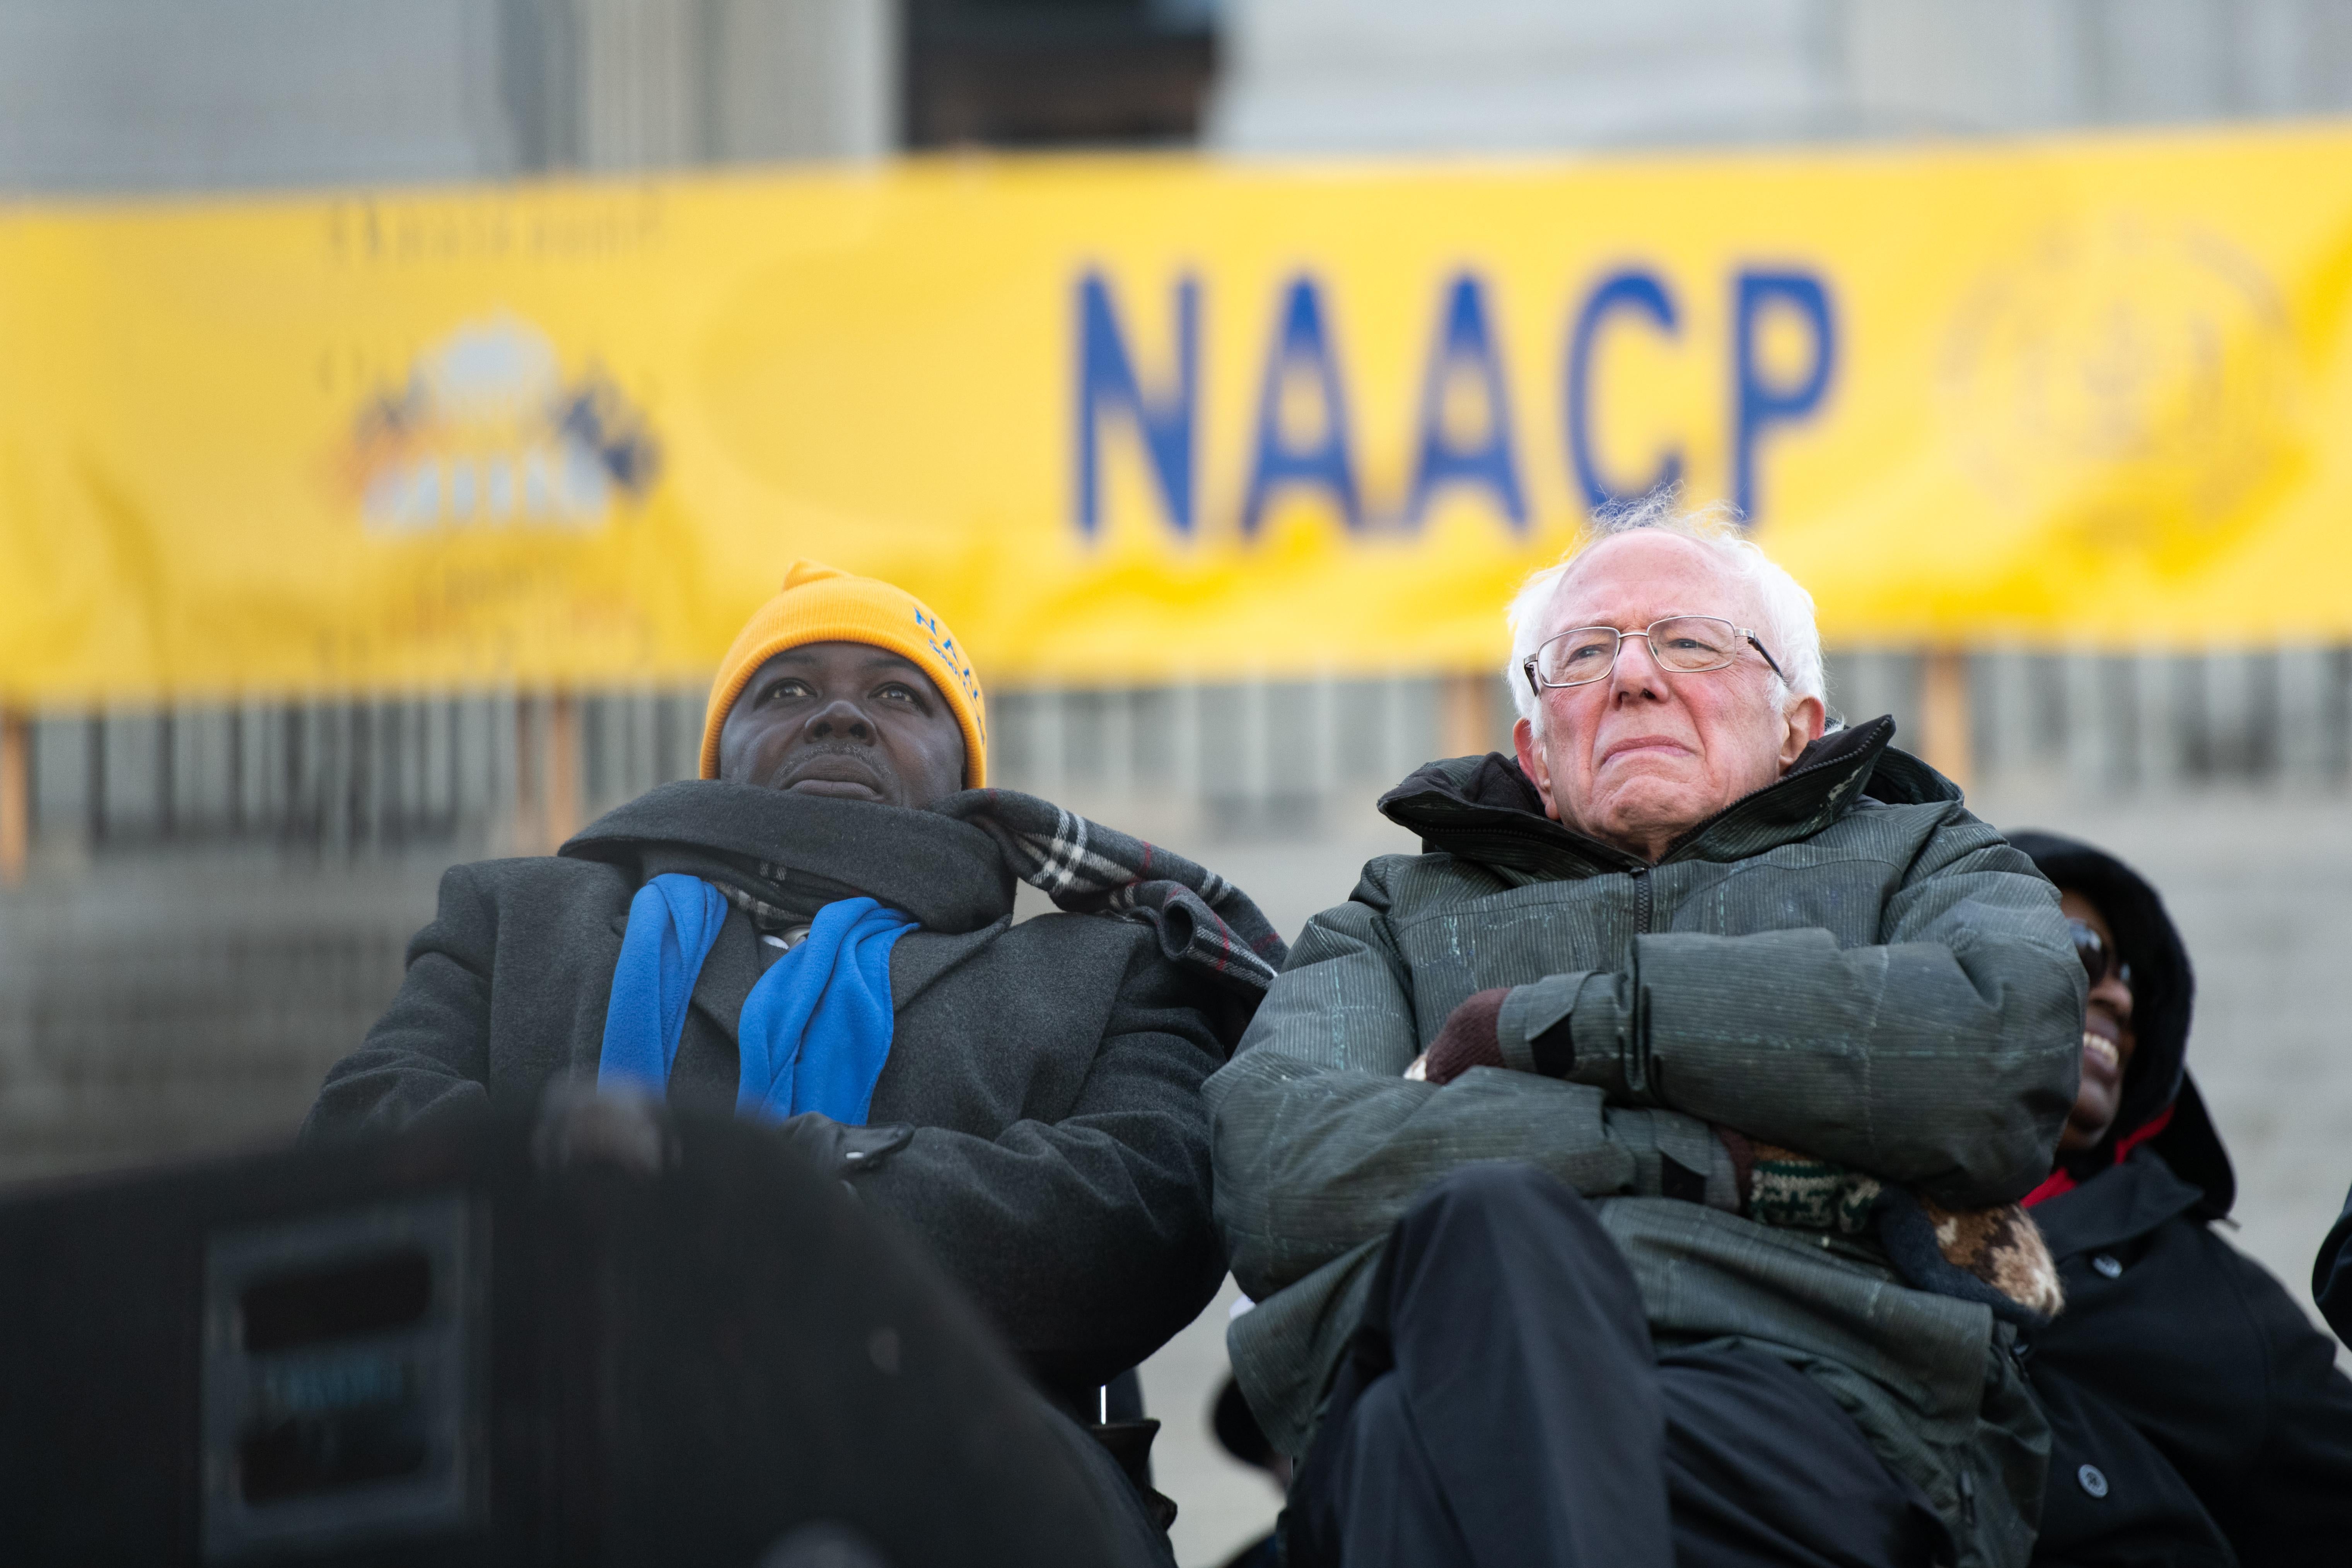 Bernie Sanders stands in front of an NAACP banner, arms crossed.